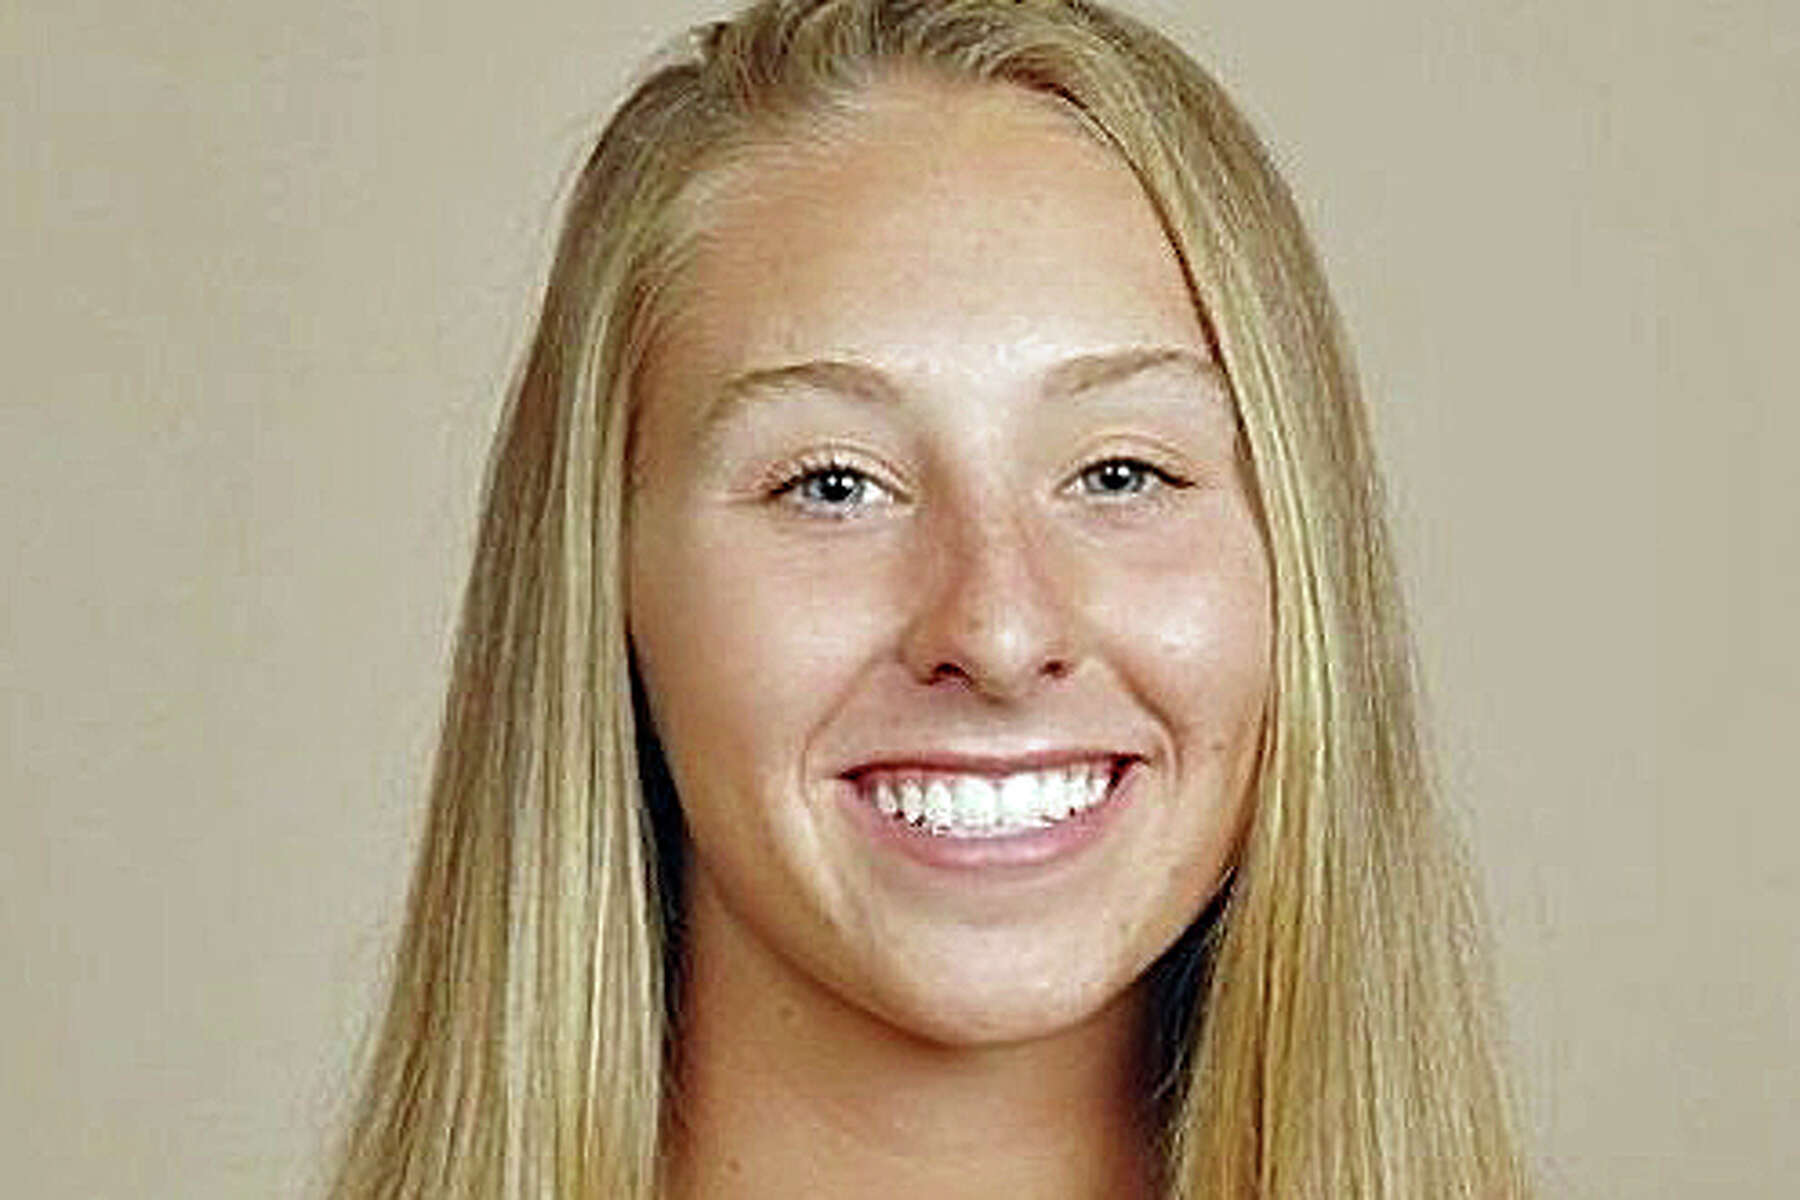 Funeral set for SCSU gymnast from Milford who died after fall